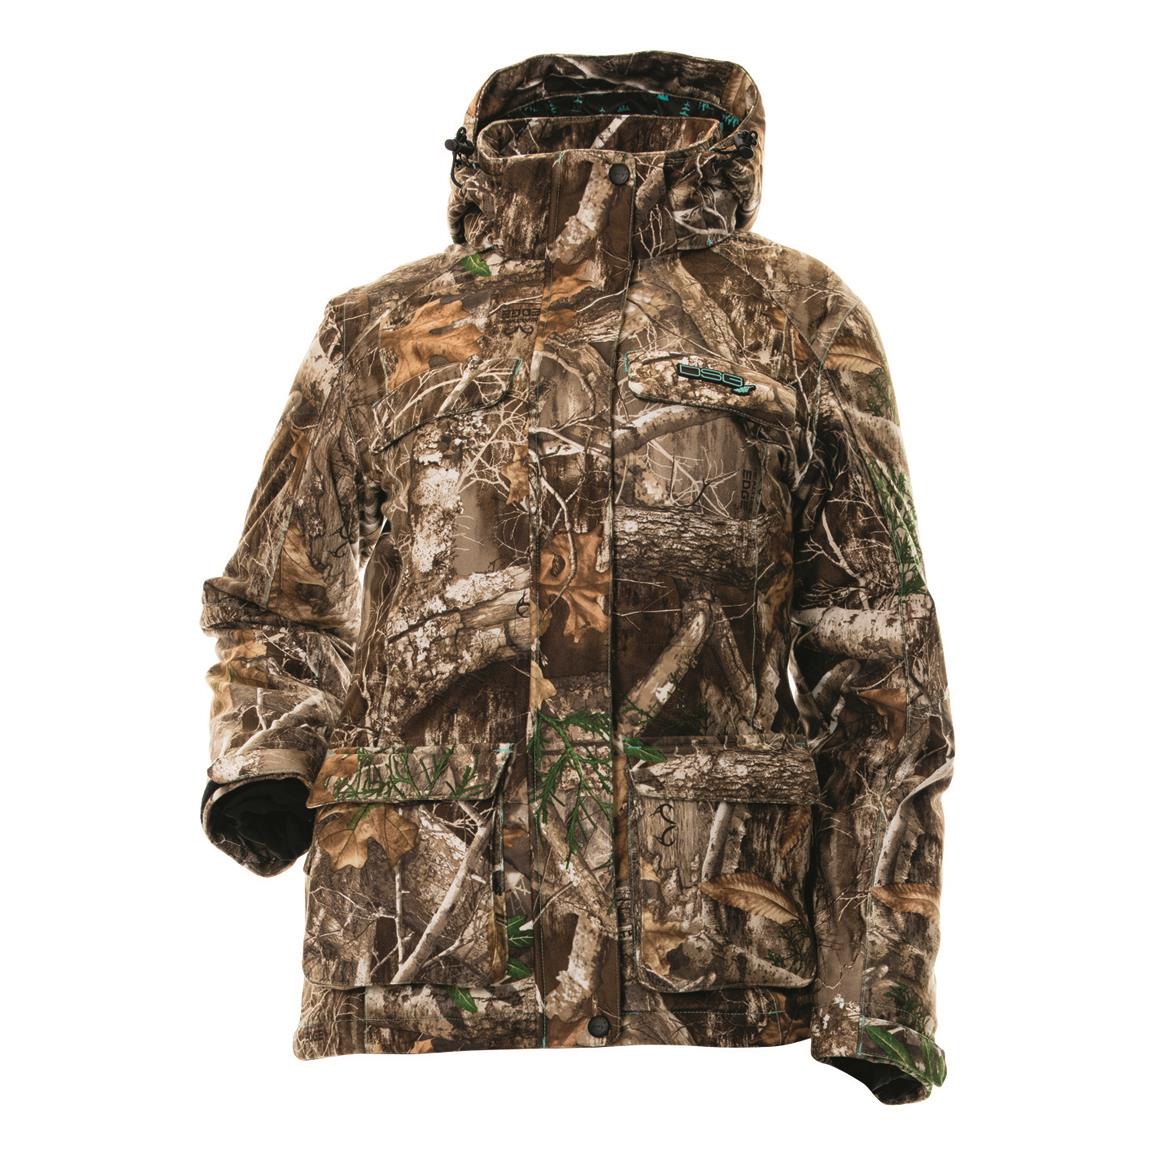 DSG Outerwear Women's Kylie 4.0 3-in-1 Hunting Jacket, Realtree EDGE™